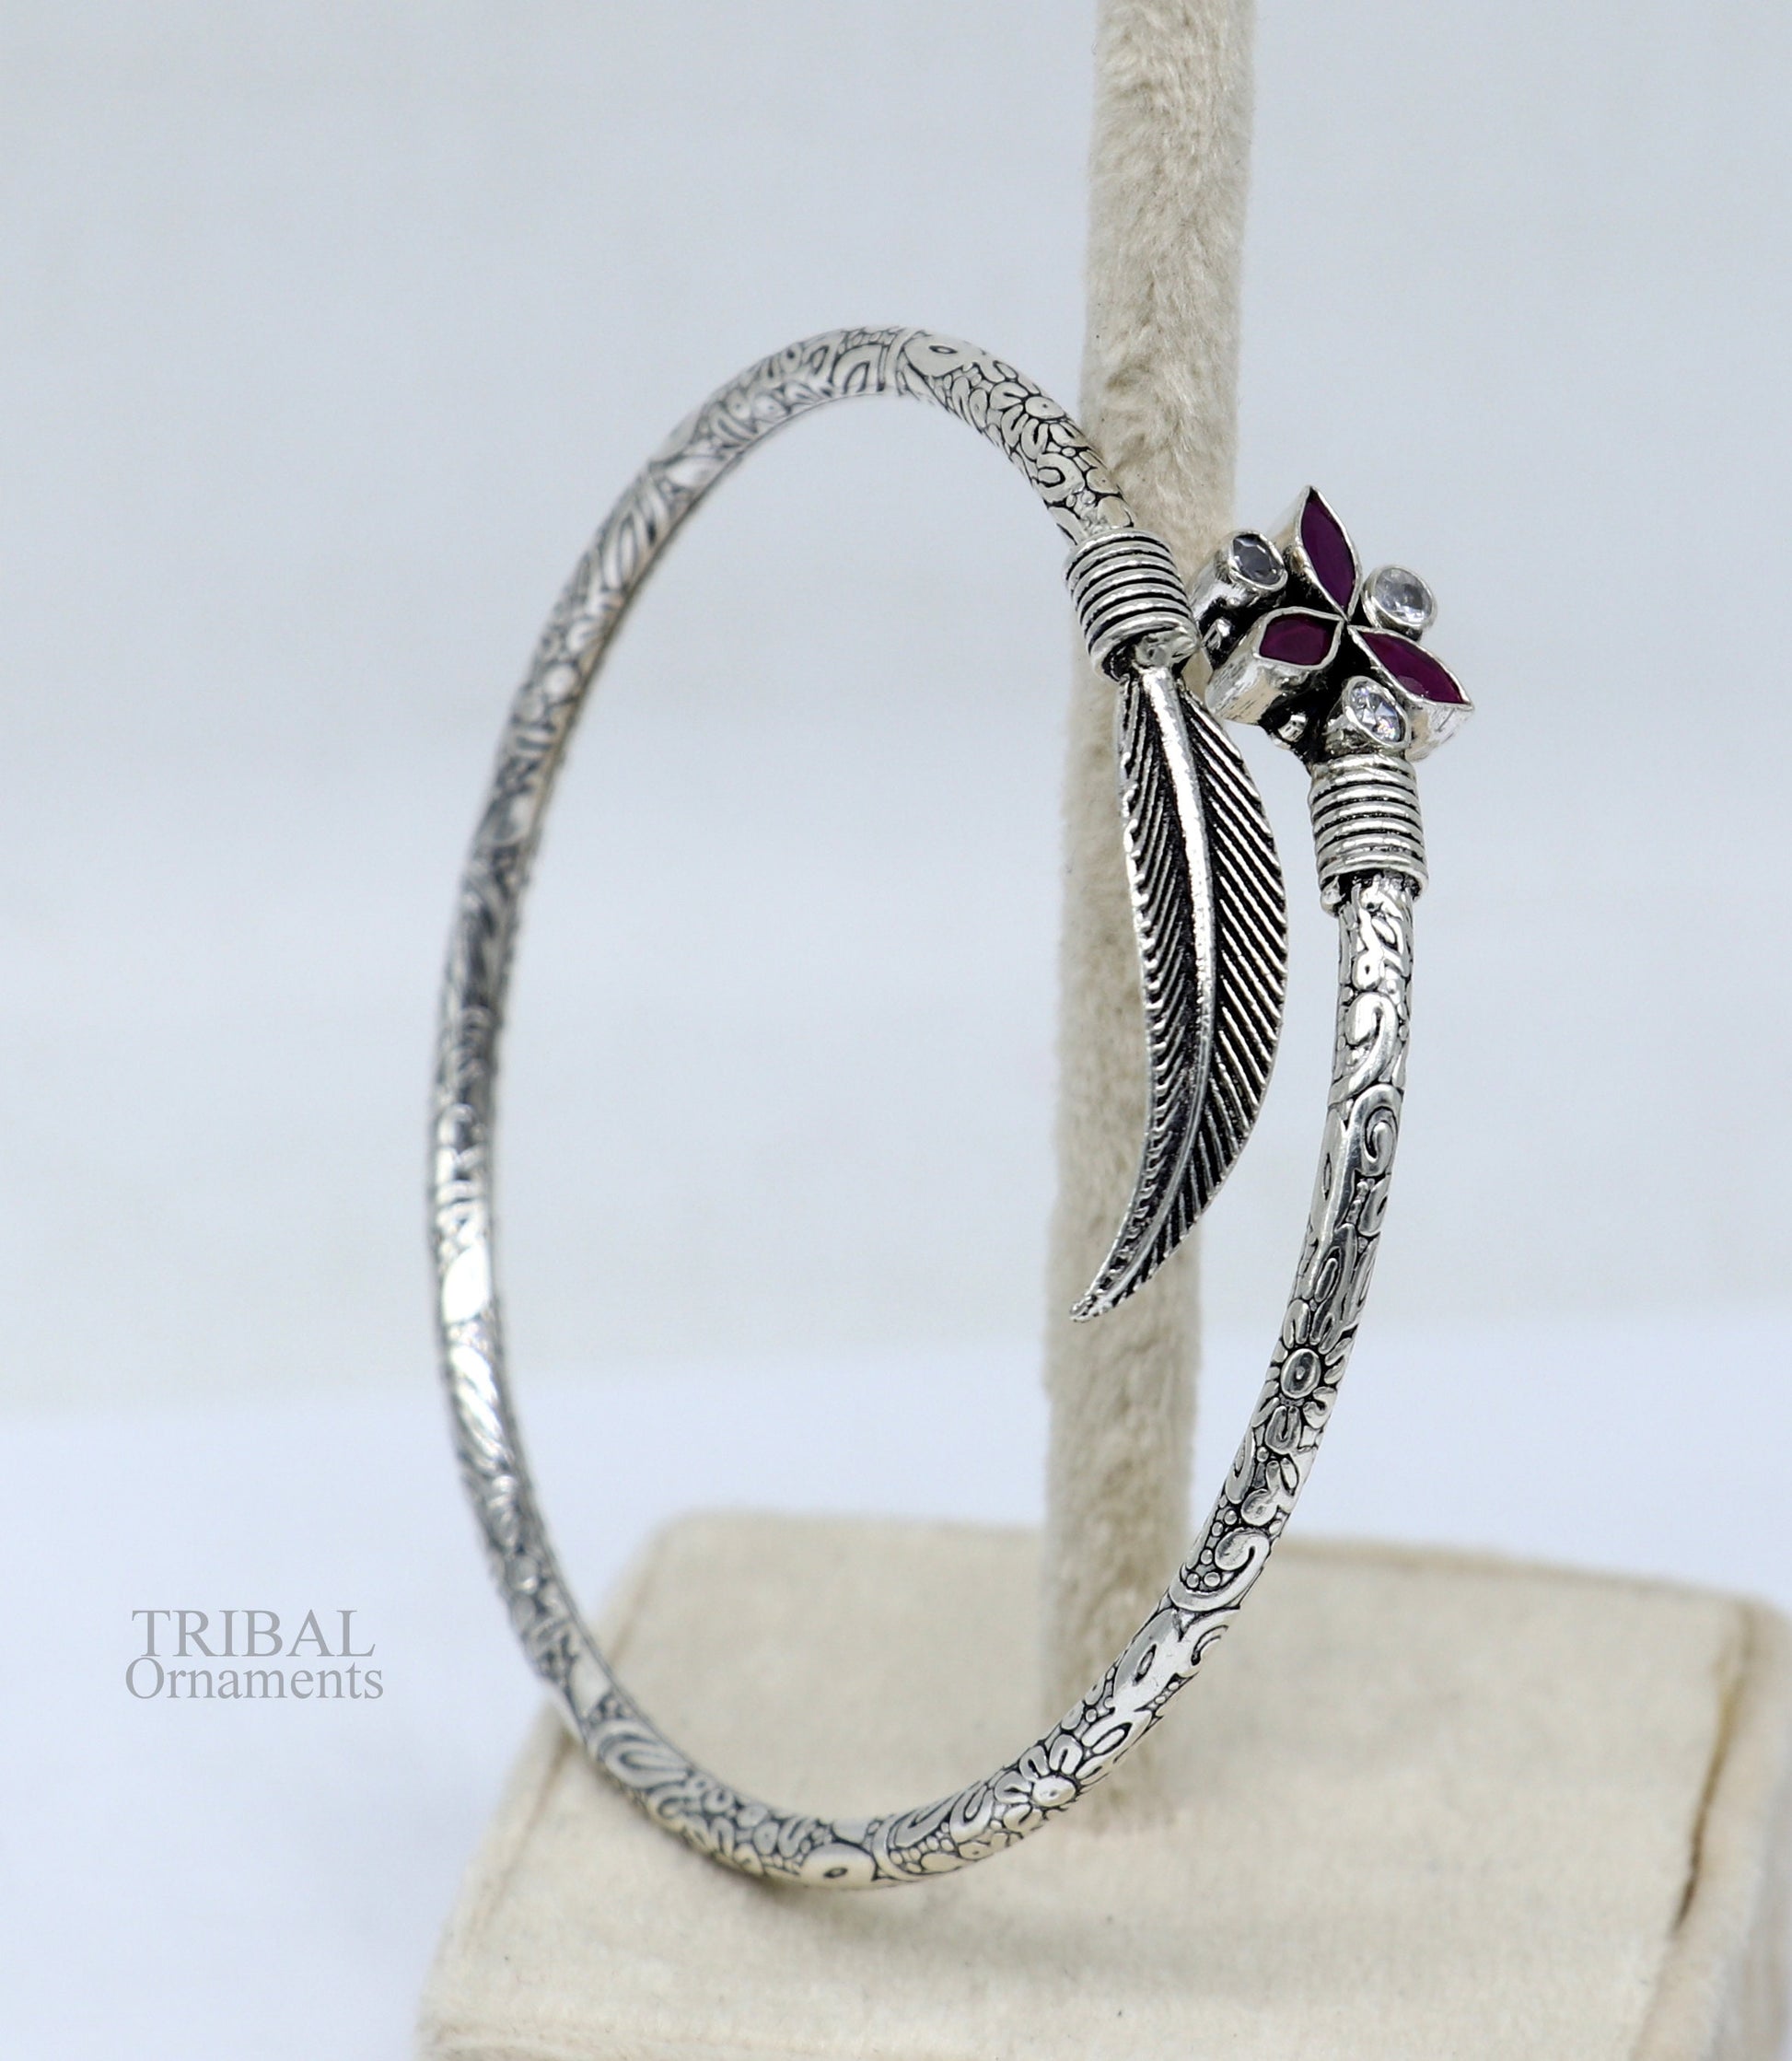 Feather style 925 sterling silver exclusive design handmade bangle bracelet, easy to plug with your wrist, pure silver kada jewelry nssk669 - TRIBAL ORNAMENTS